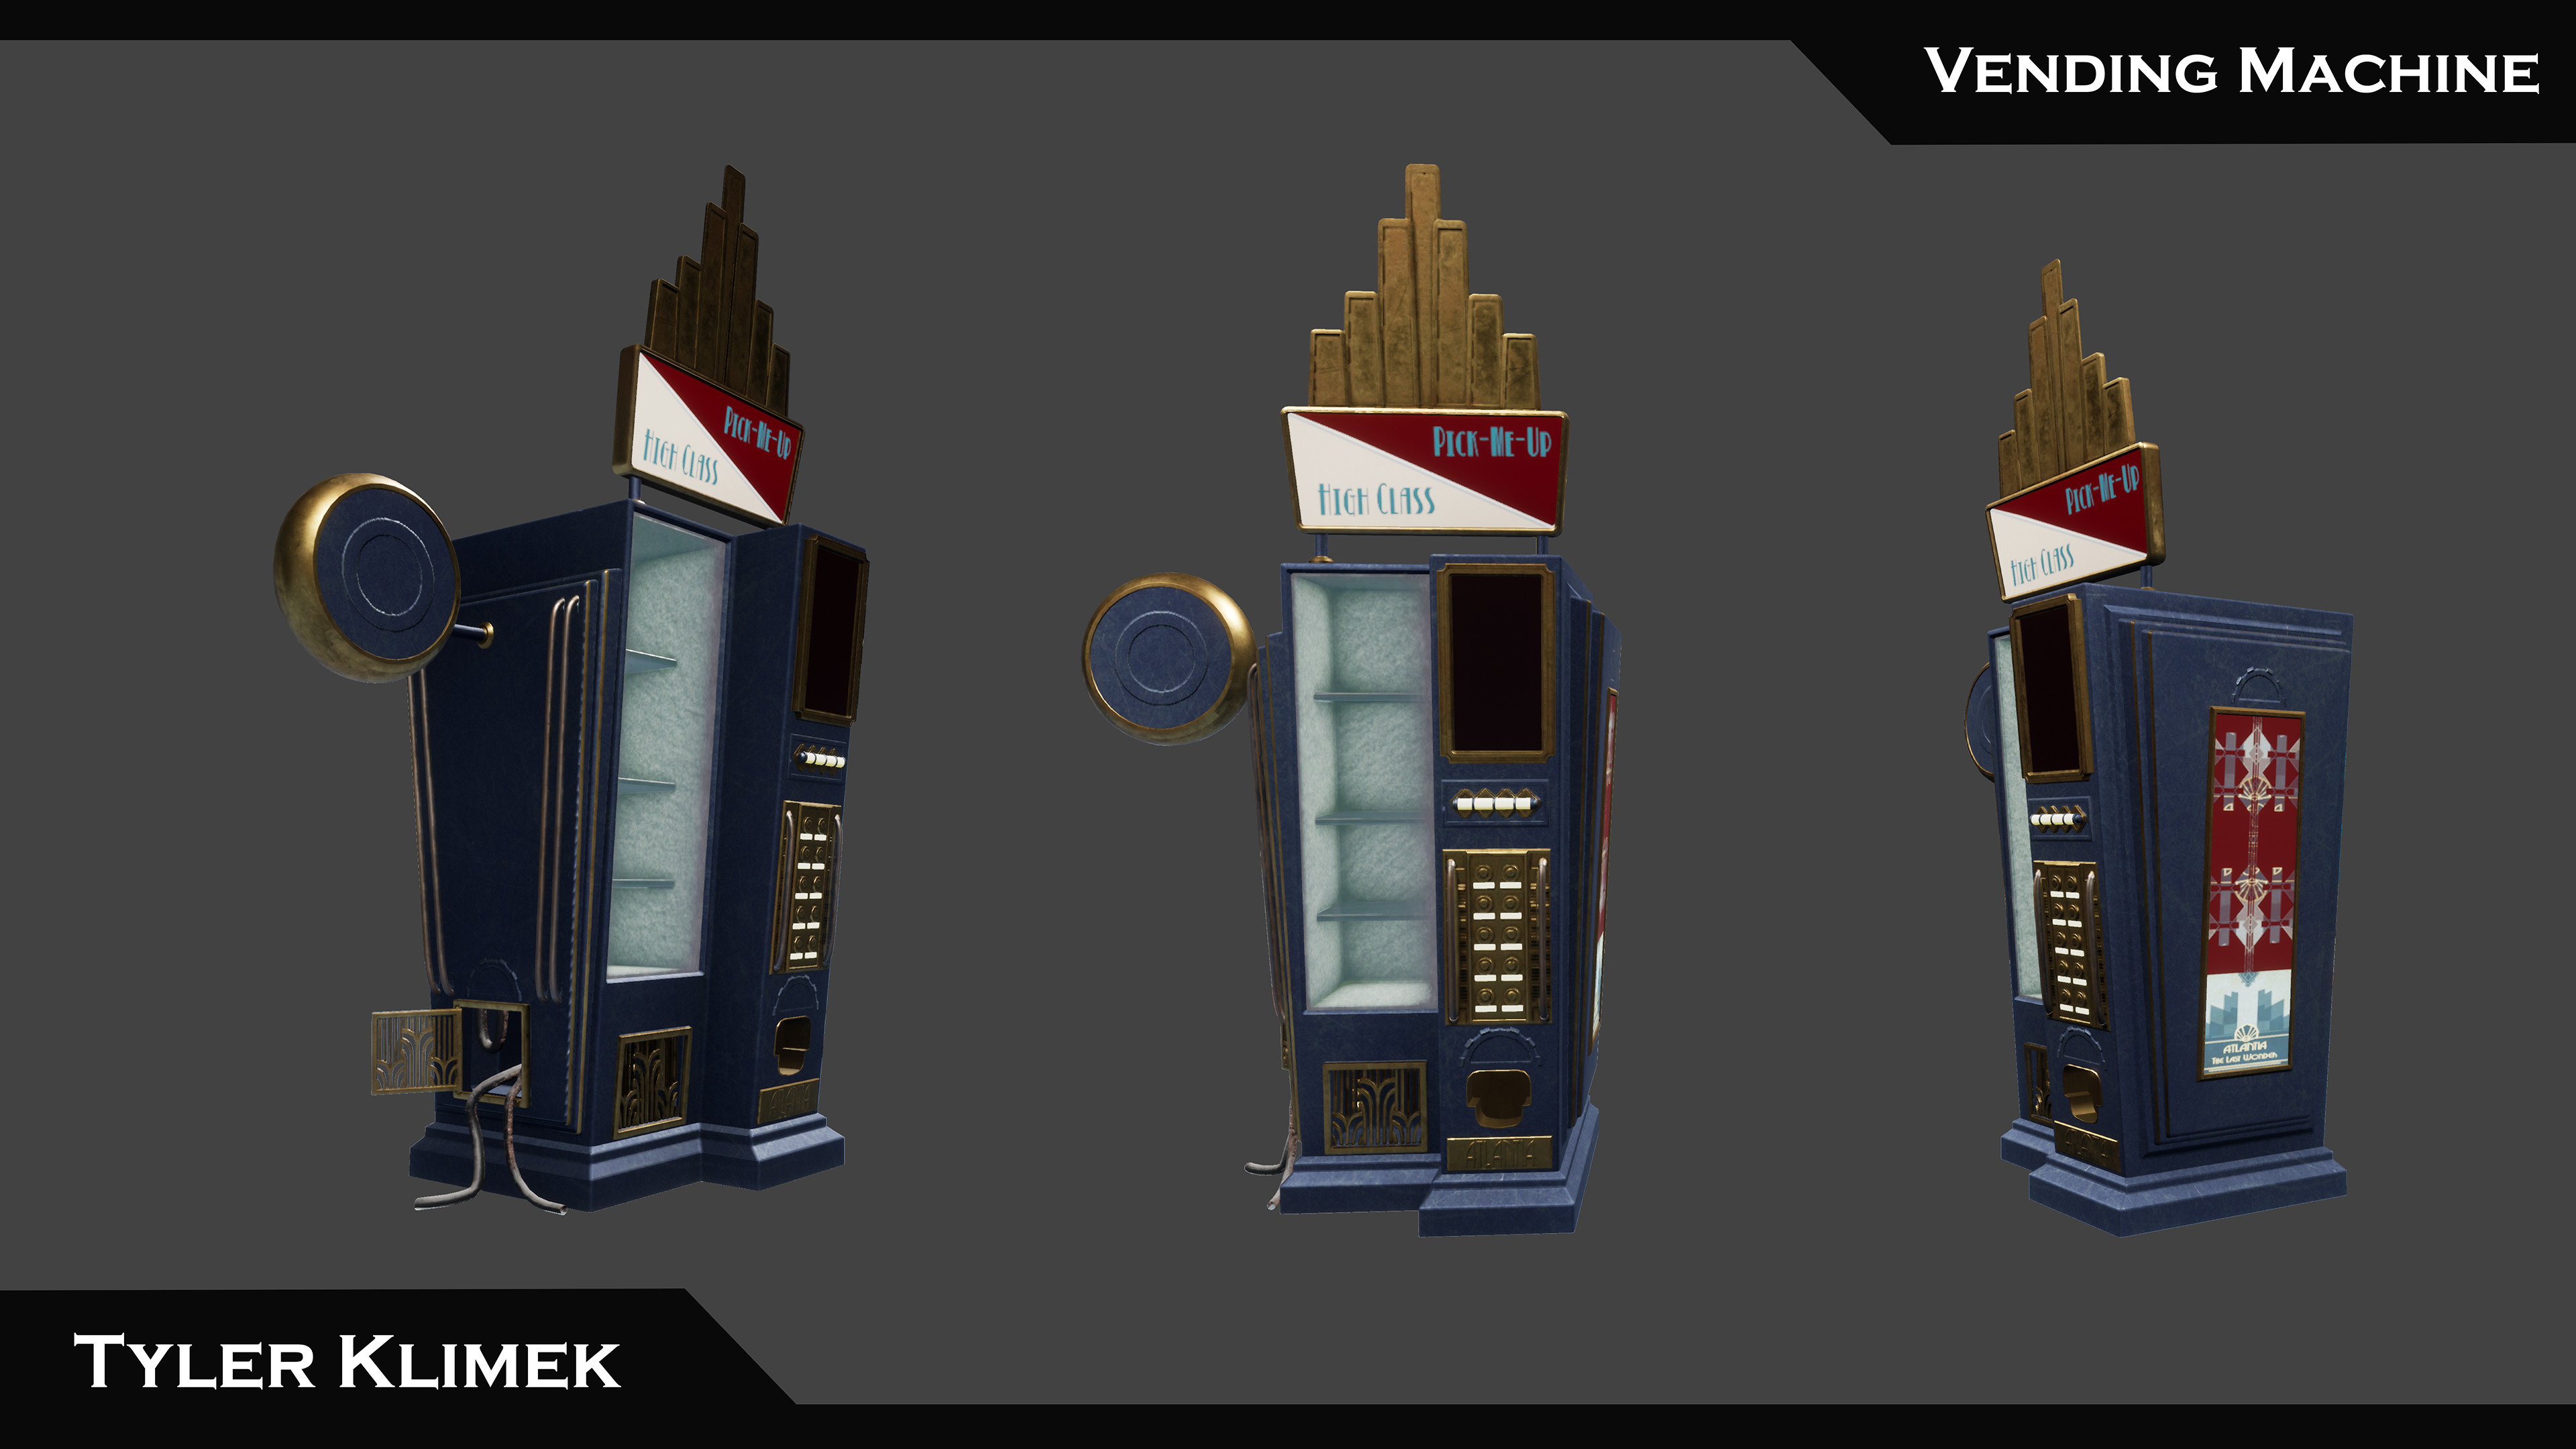 The vending machine asset I made for the scene. This design was extremely influenced by bioshock